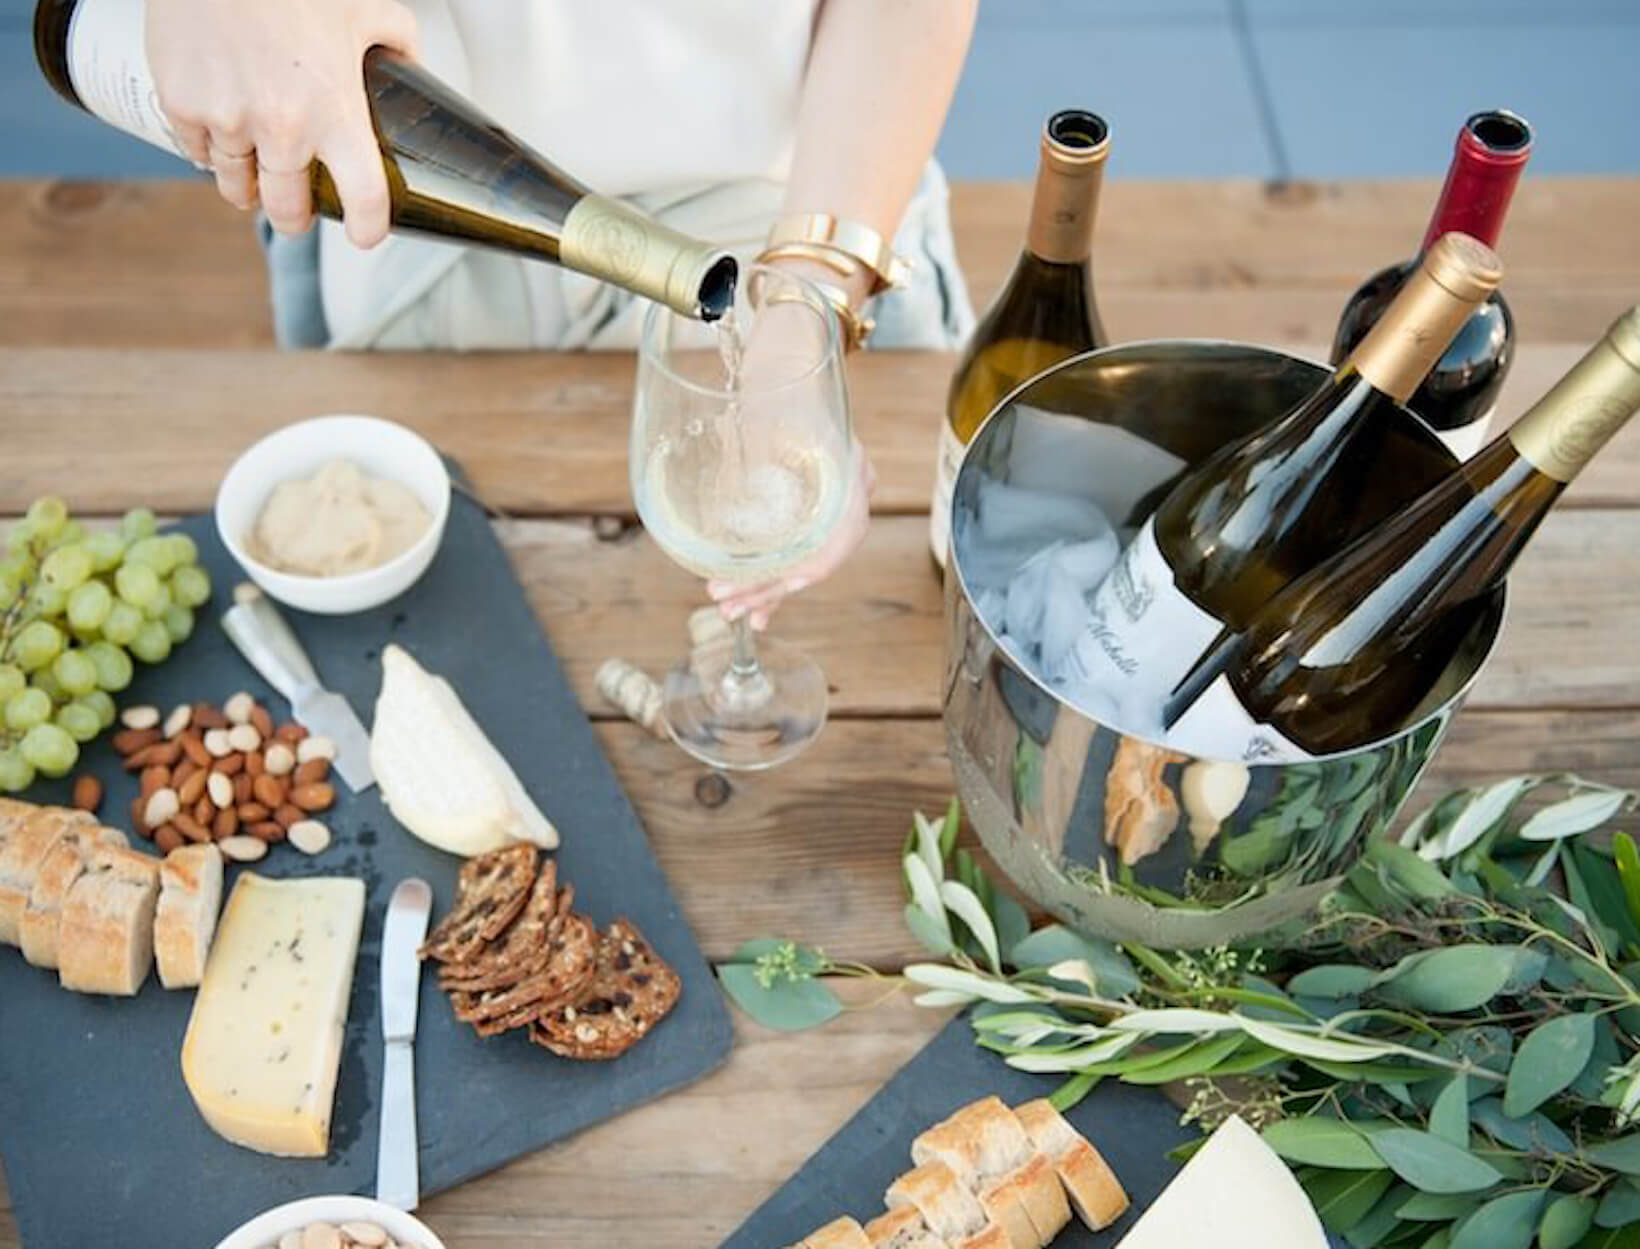 It S All In The Details Everything You Need For A Backyard Wine Tasting Goop